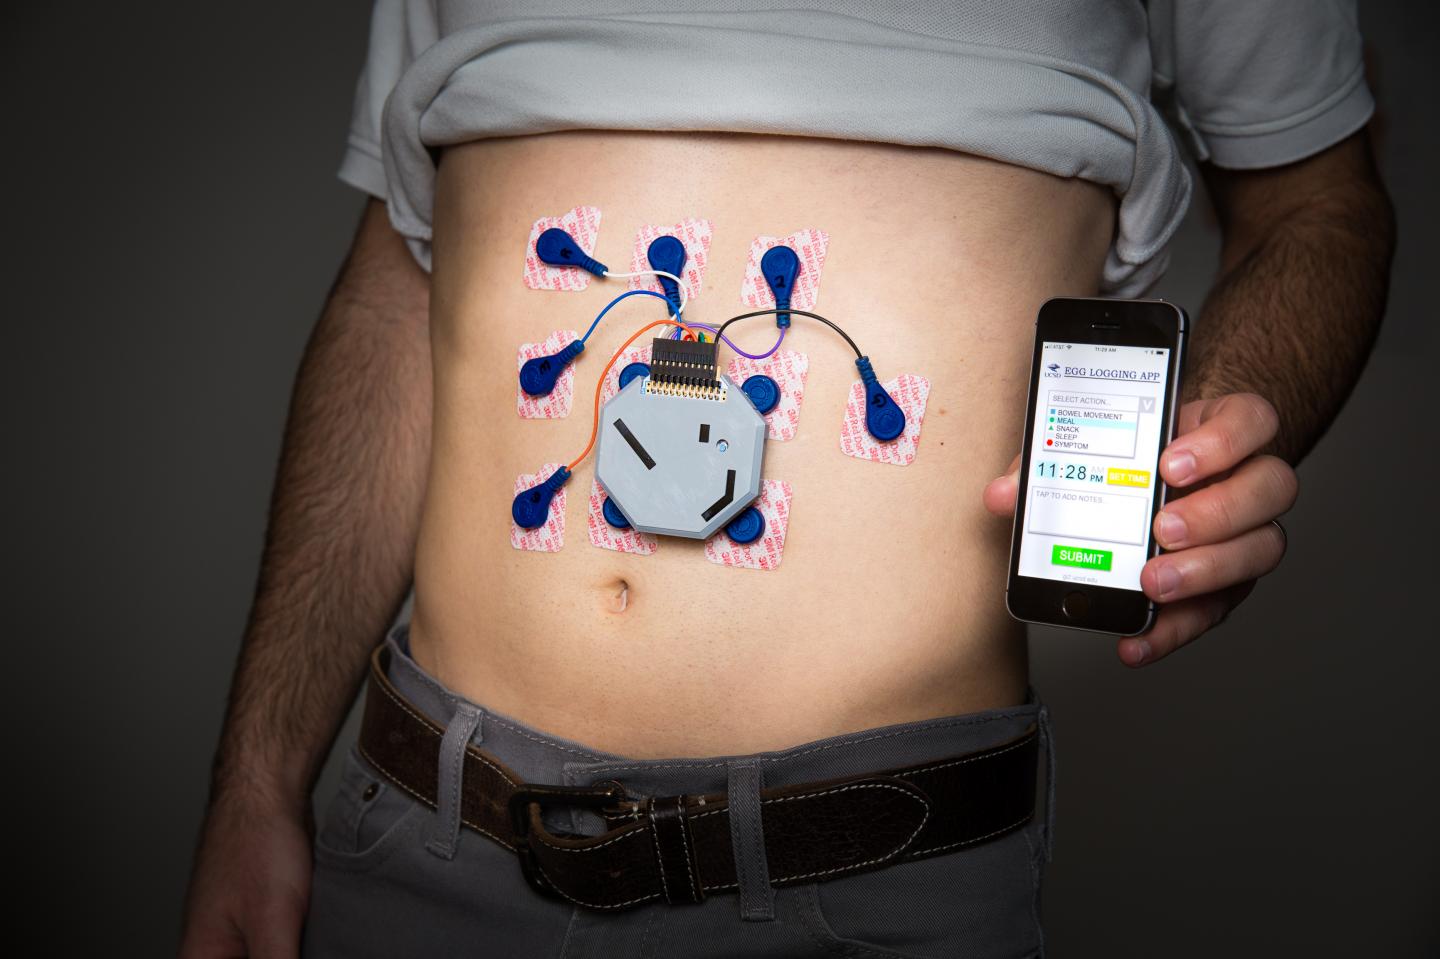 Researchers have developed a wearable system to monitor stomach activity that performs as well as current state of the art methods but can be used outside of a clinical setting.  (Source: University of California San Diego)